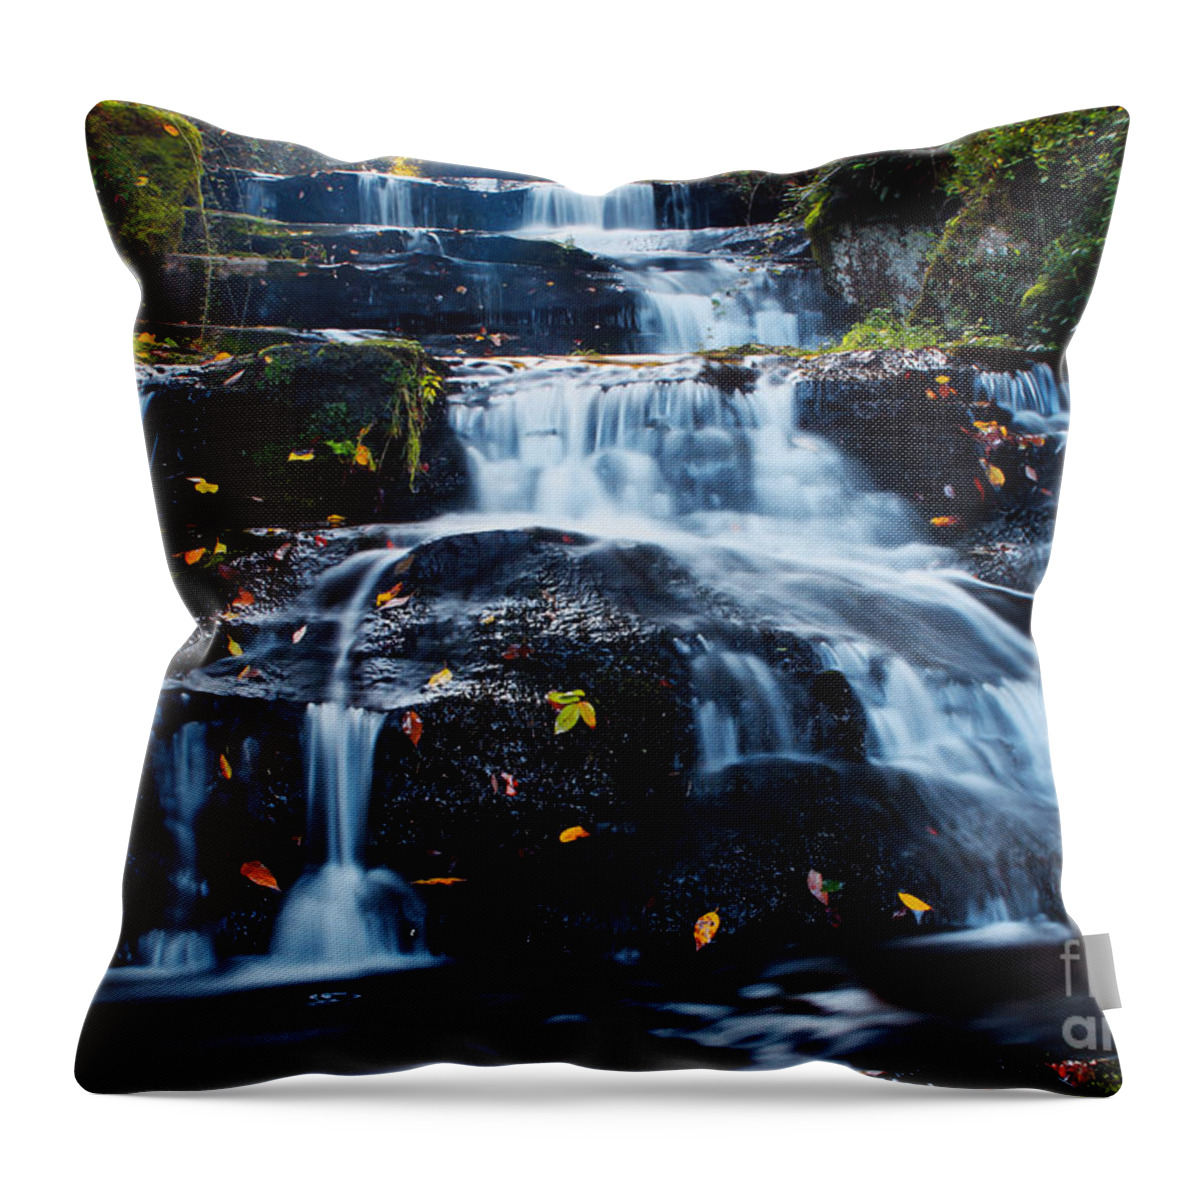 Waterfall Throw Pillow featuring the photograph Cascade In Cosby II by Douglas Stucky